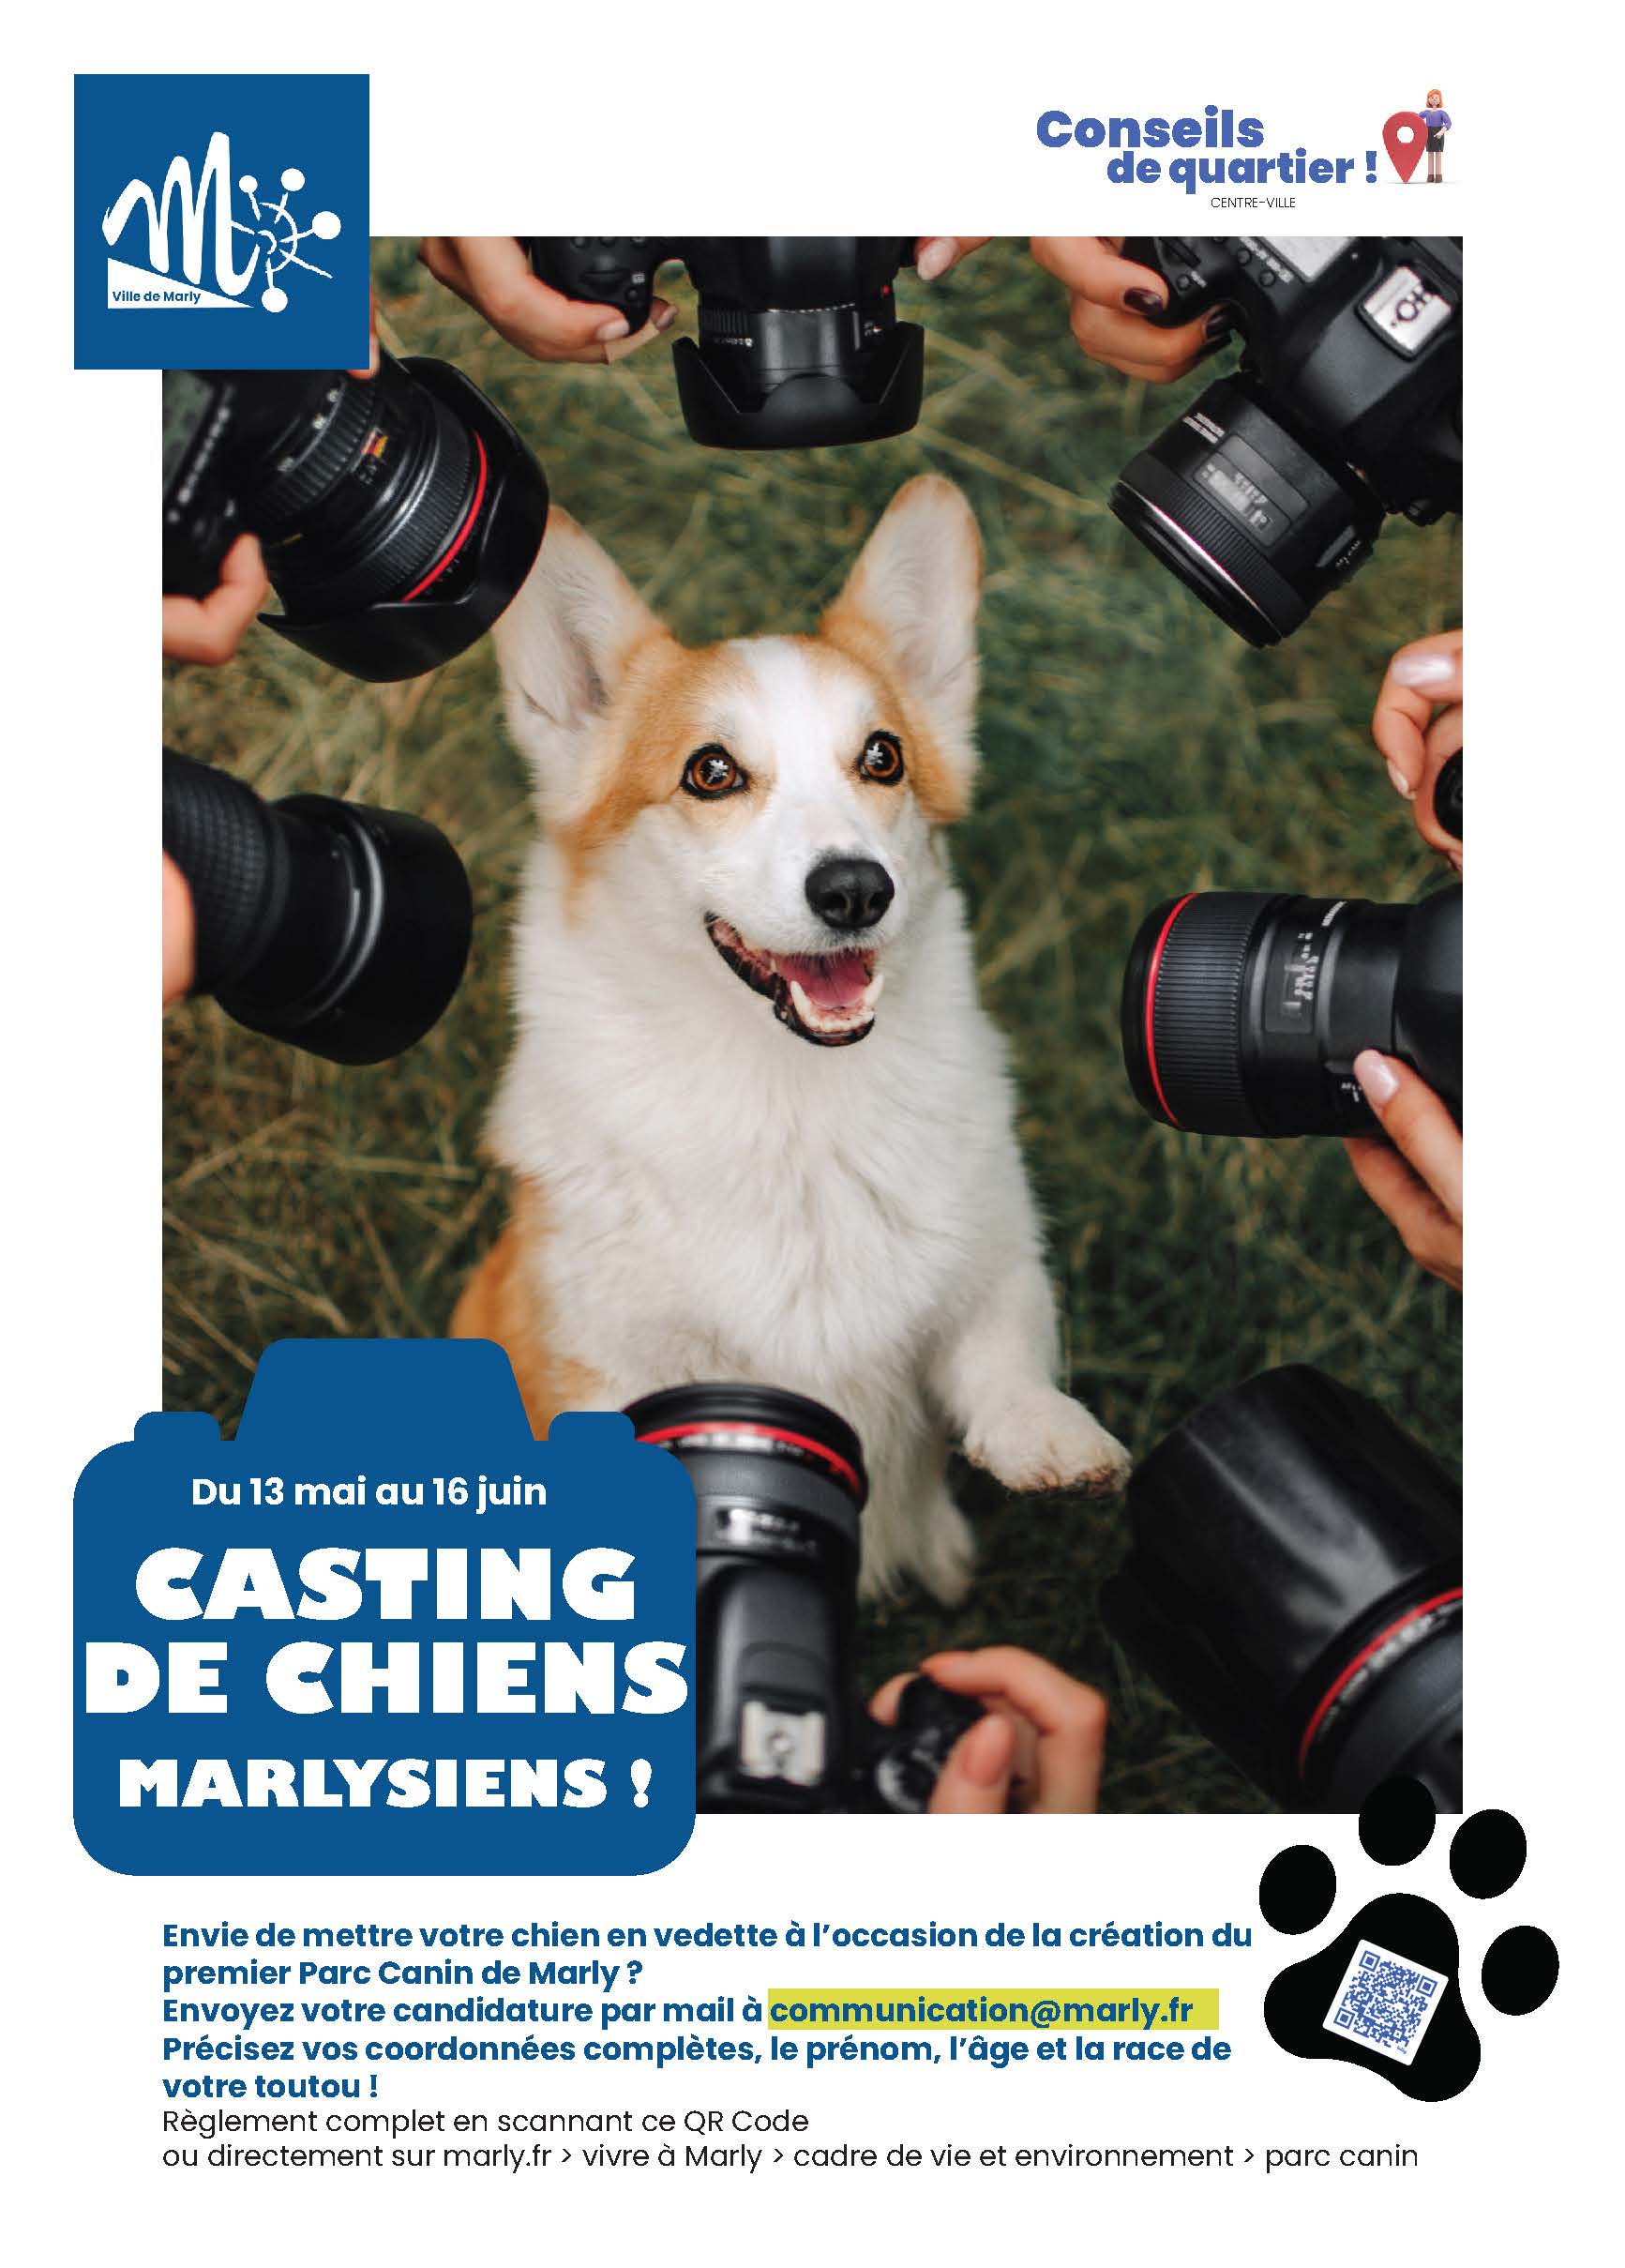 Casting de chiens marlysiens